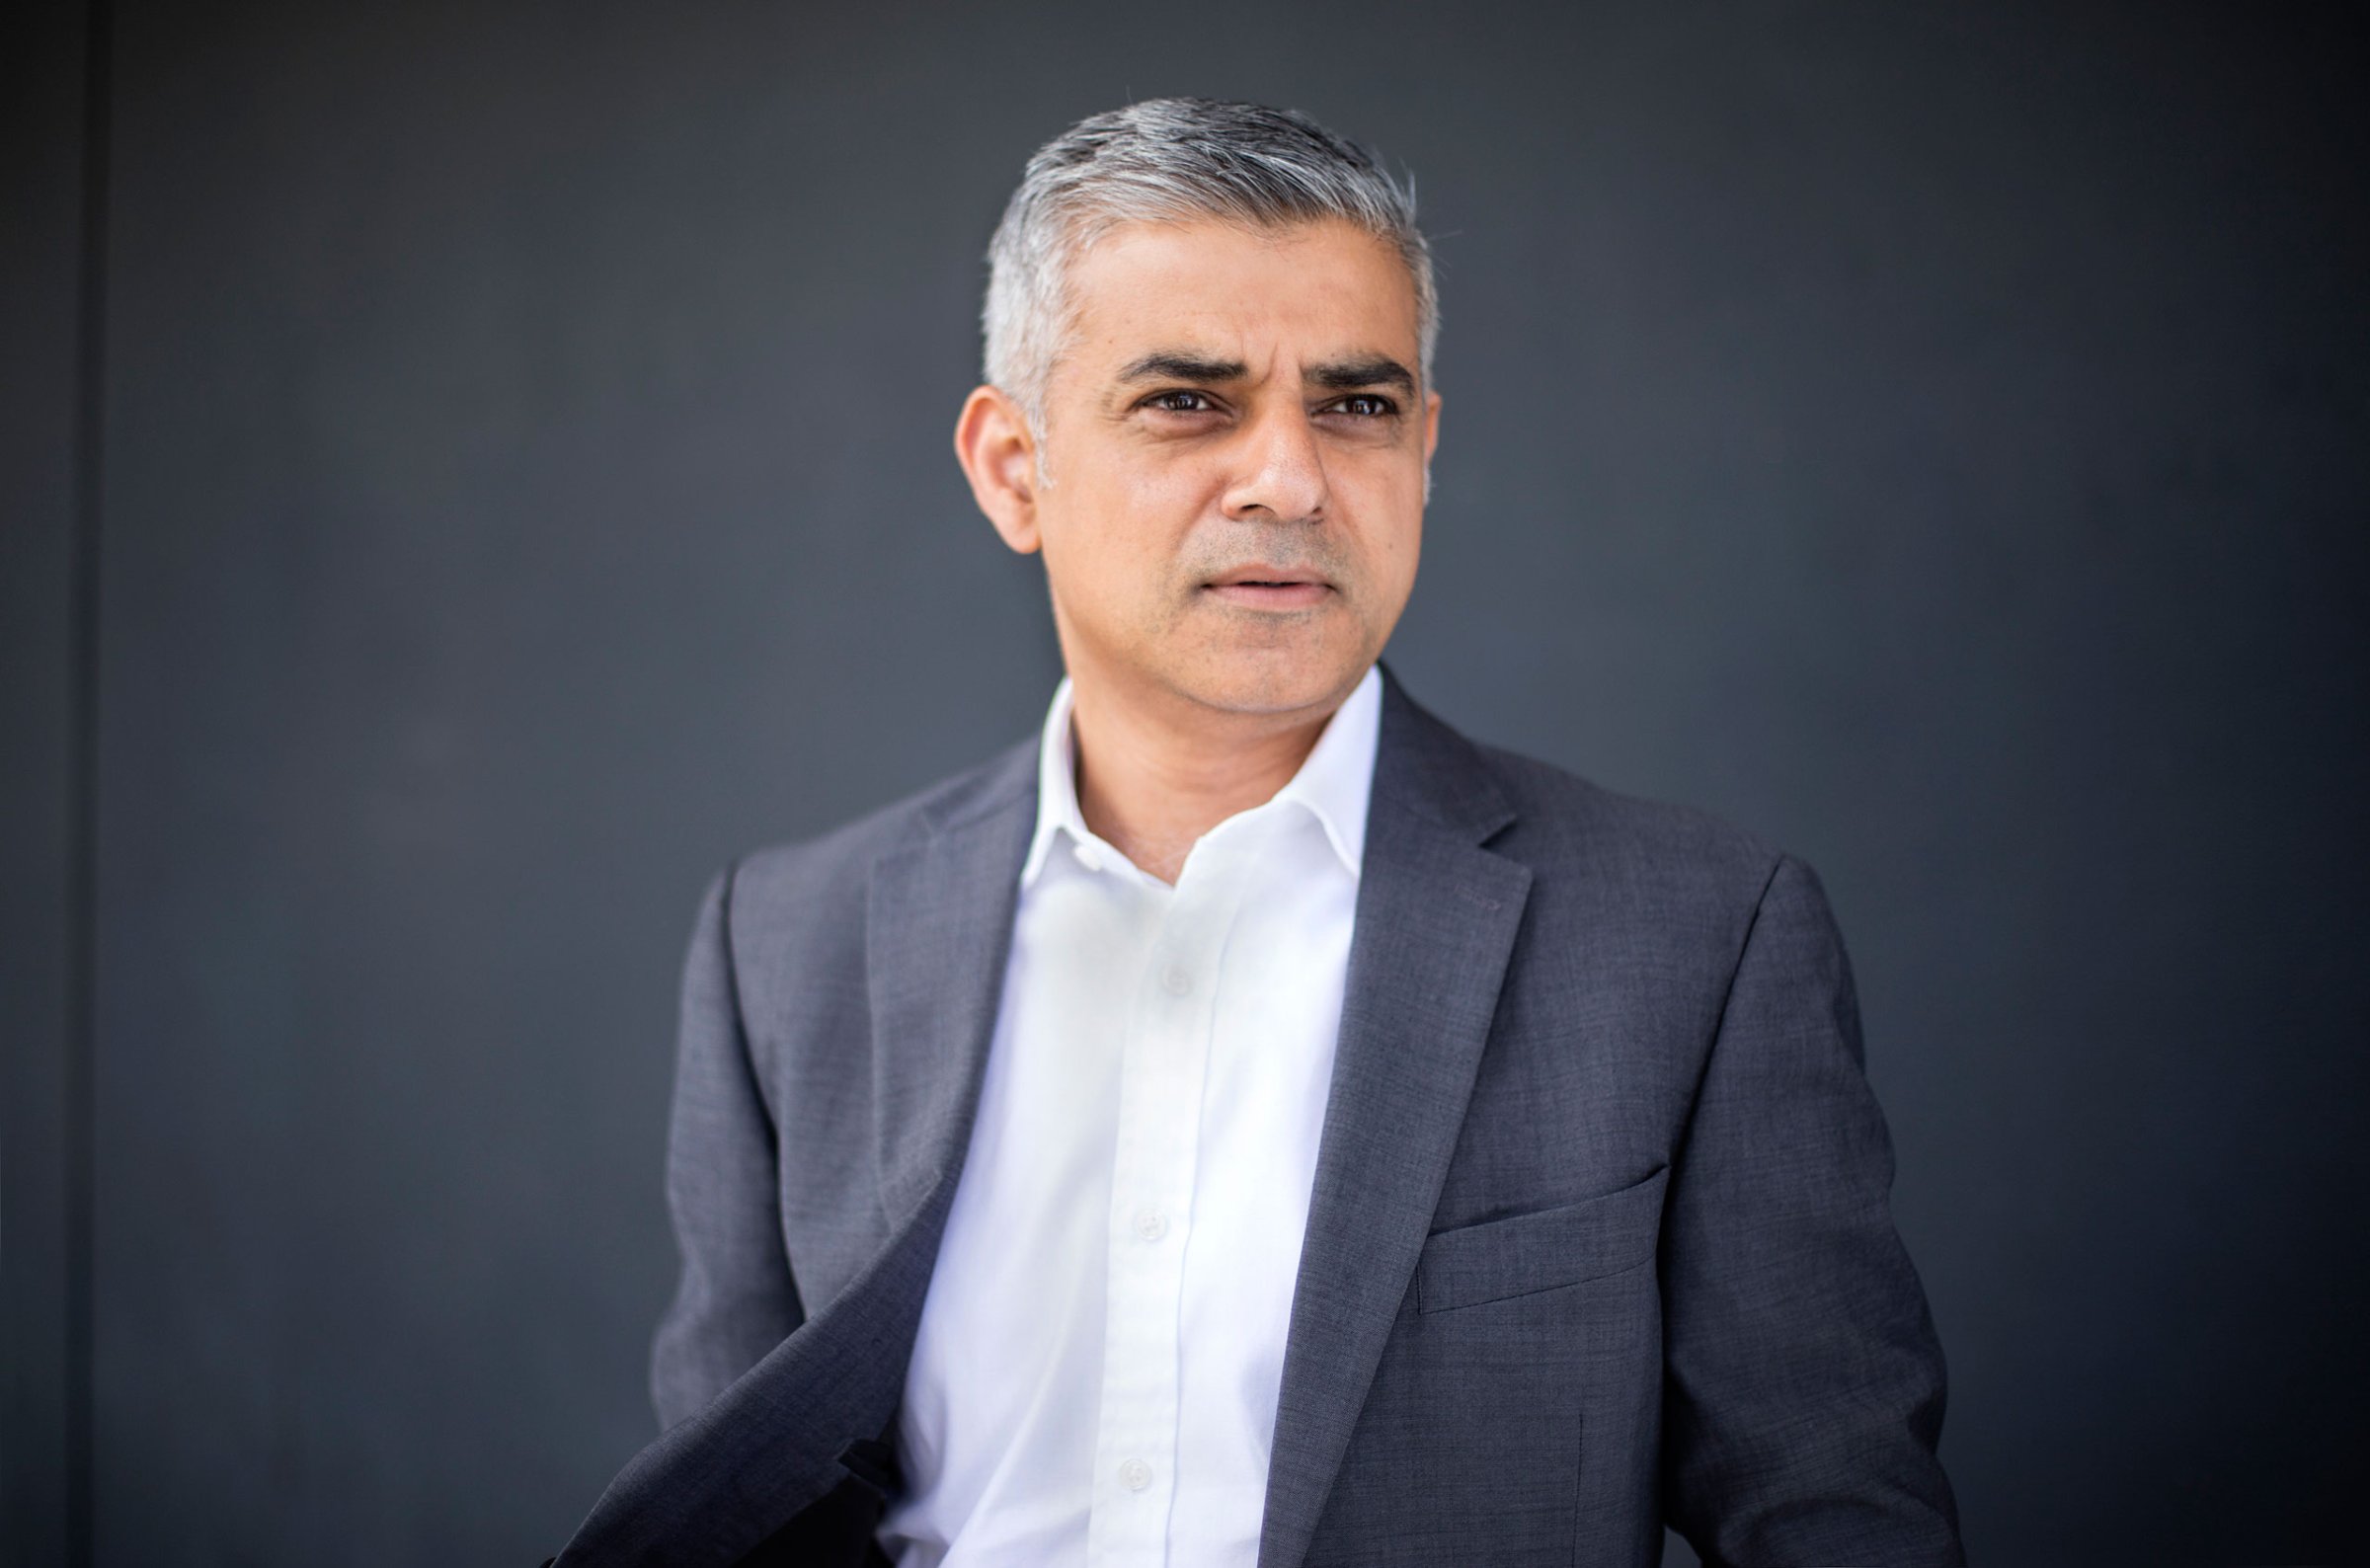 “London is the greatest city in the world,” says Khan, “but we’re at a crossroads.”